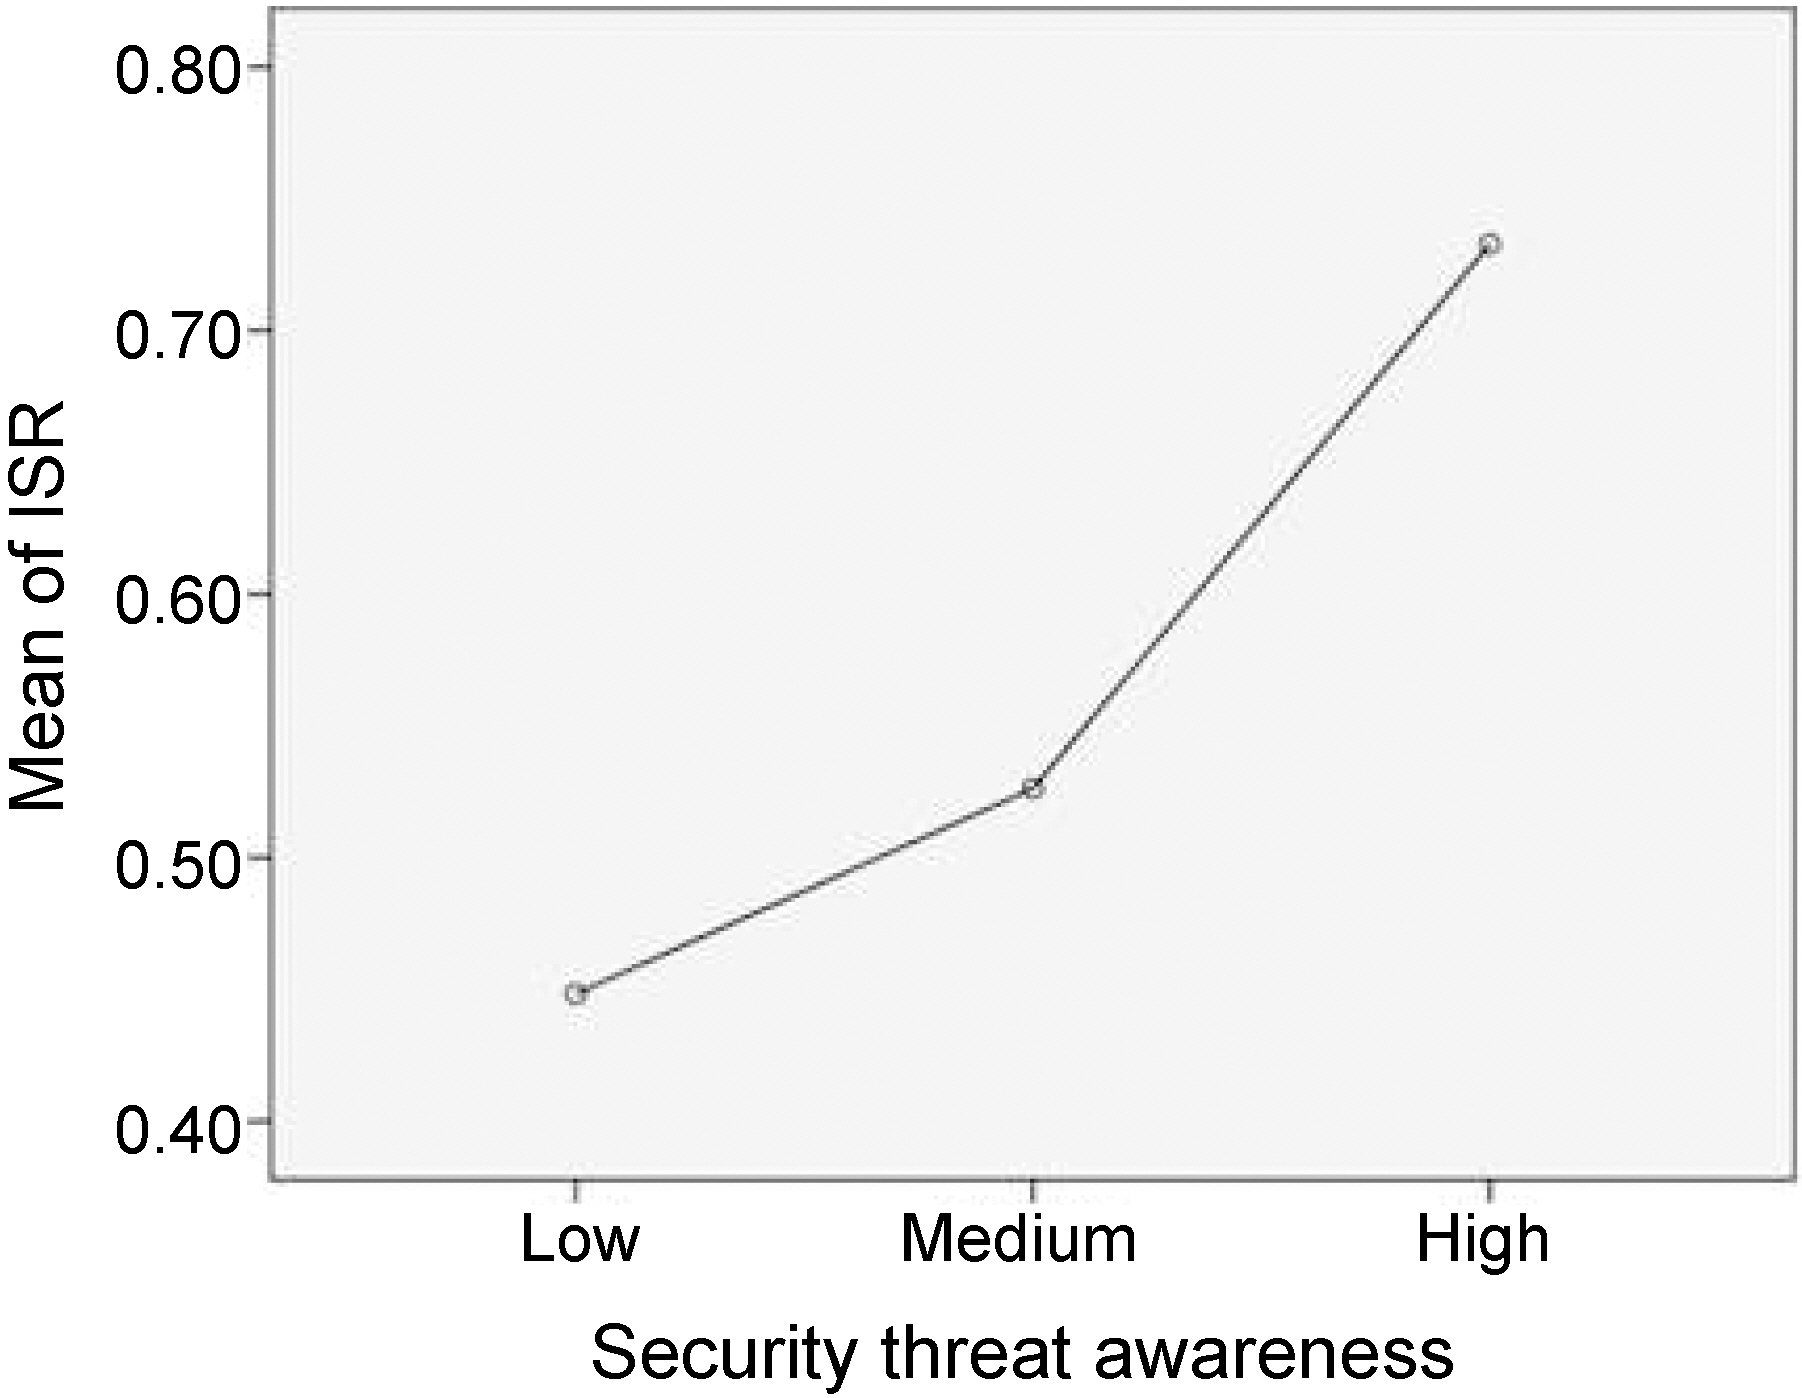 Estimated marginal means of composite ISR values depending on the level of security threat awareness